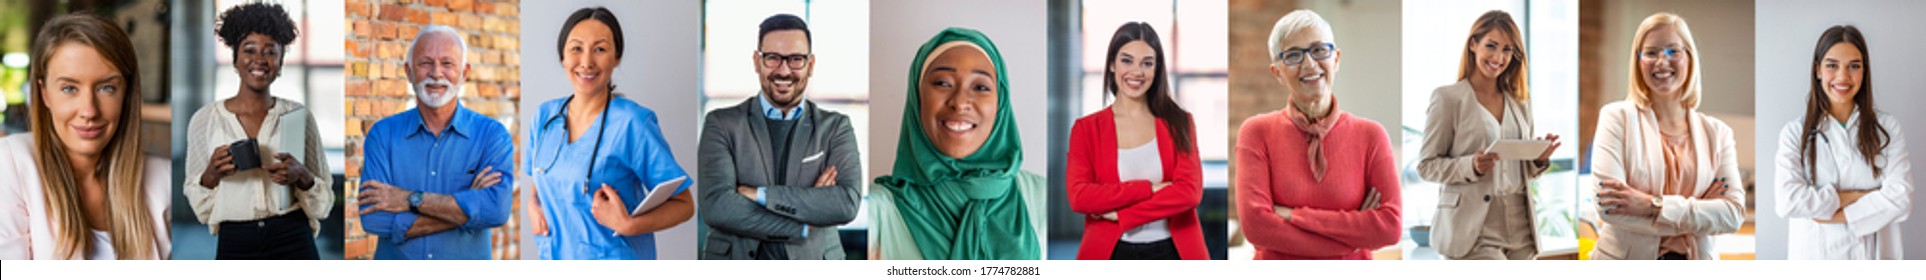 Collage of portraits of an ethnically diverse and mixed age group of focused business professionals. people of different races portrait set. Black, Caucasian, mix raced men and women multiple shot 